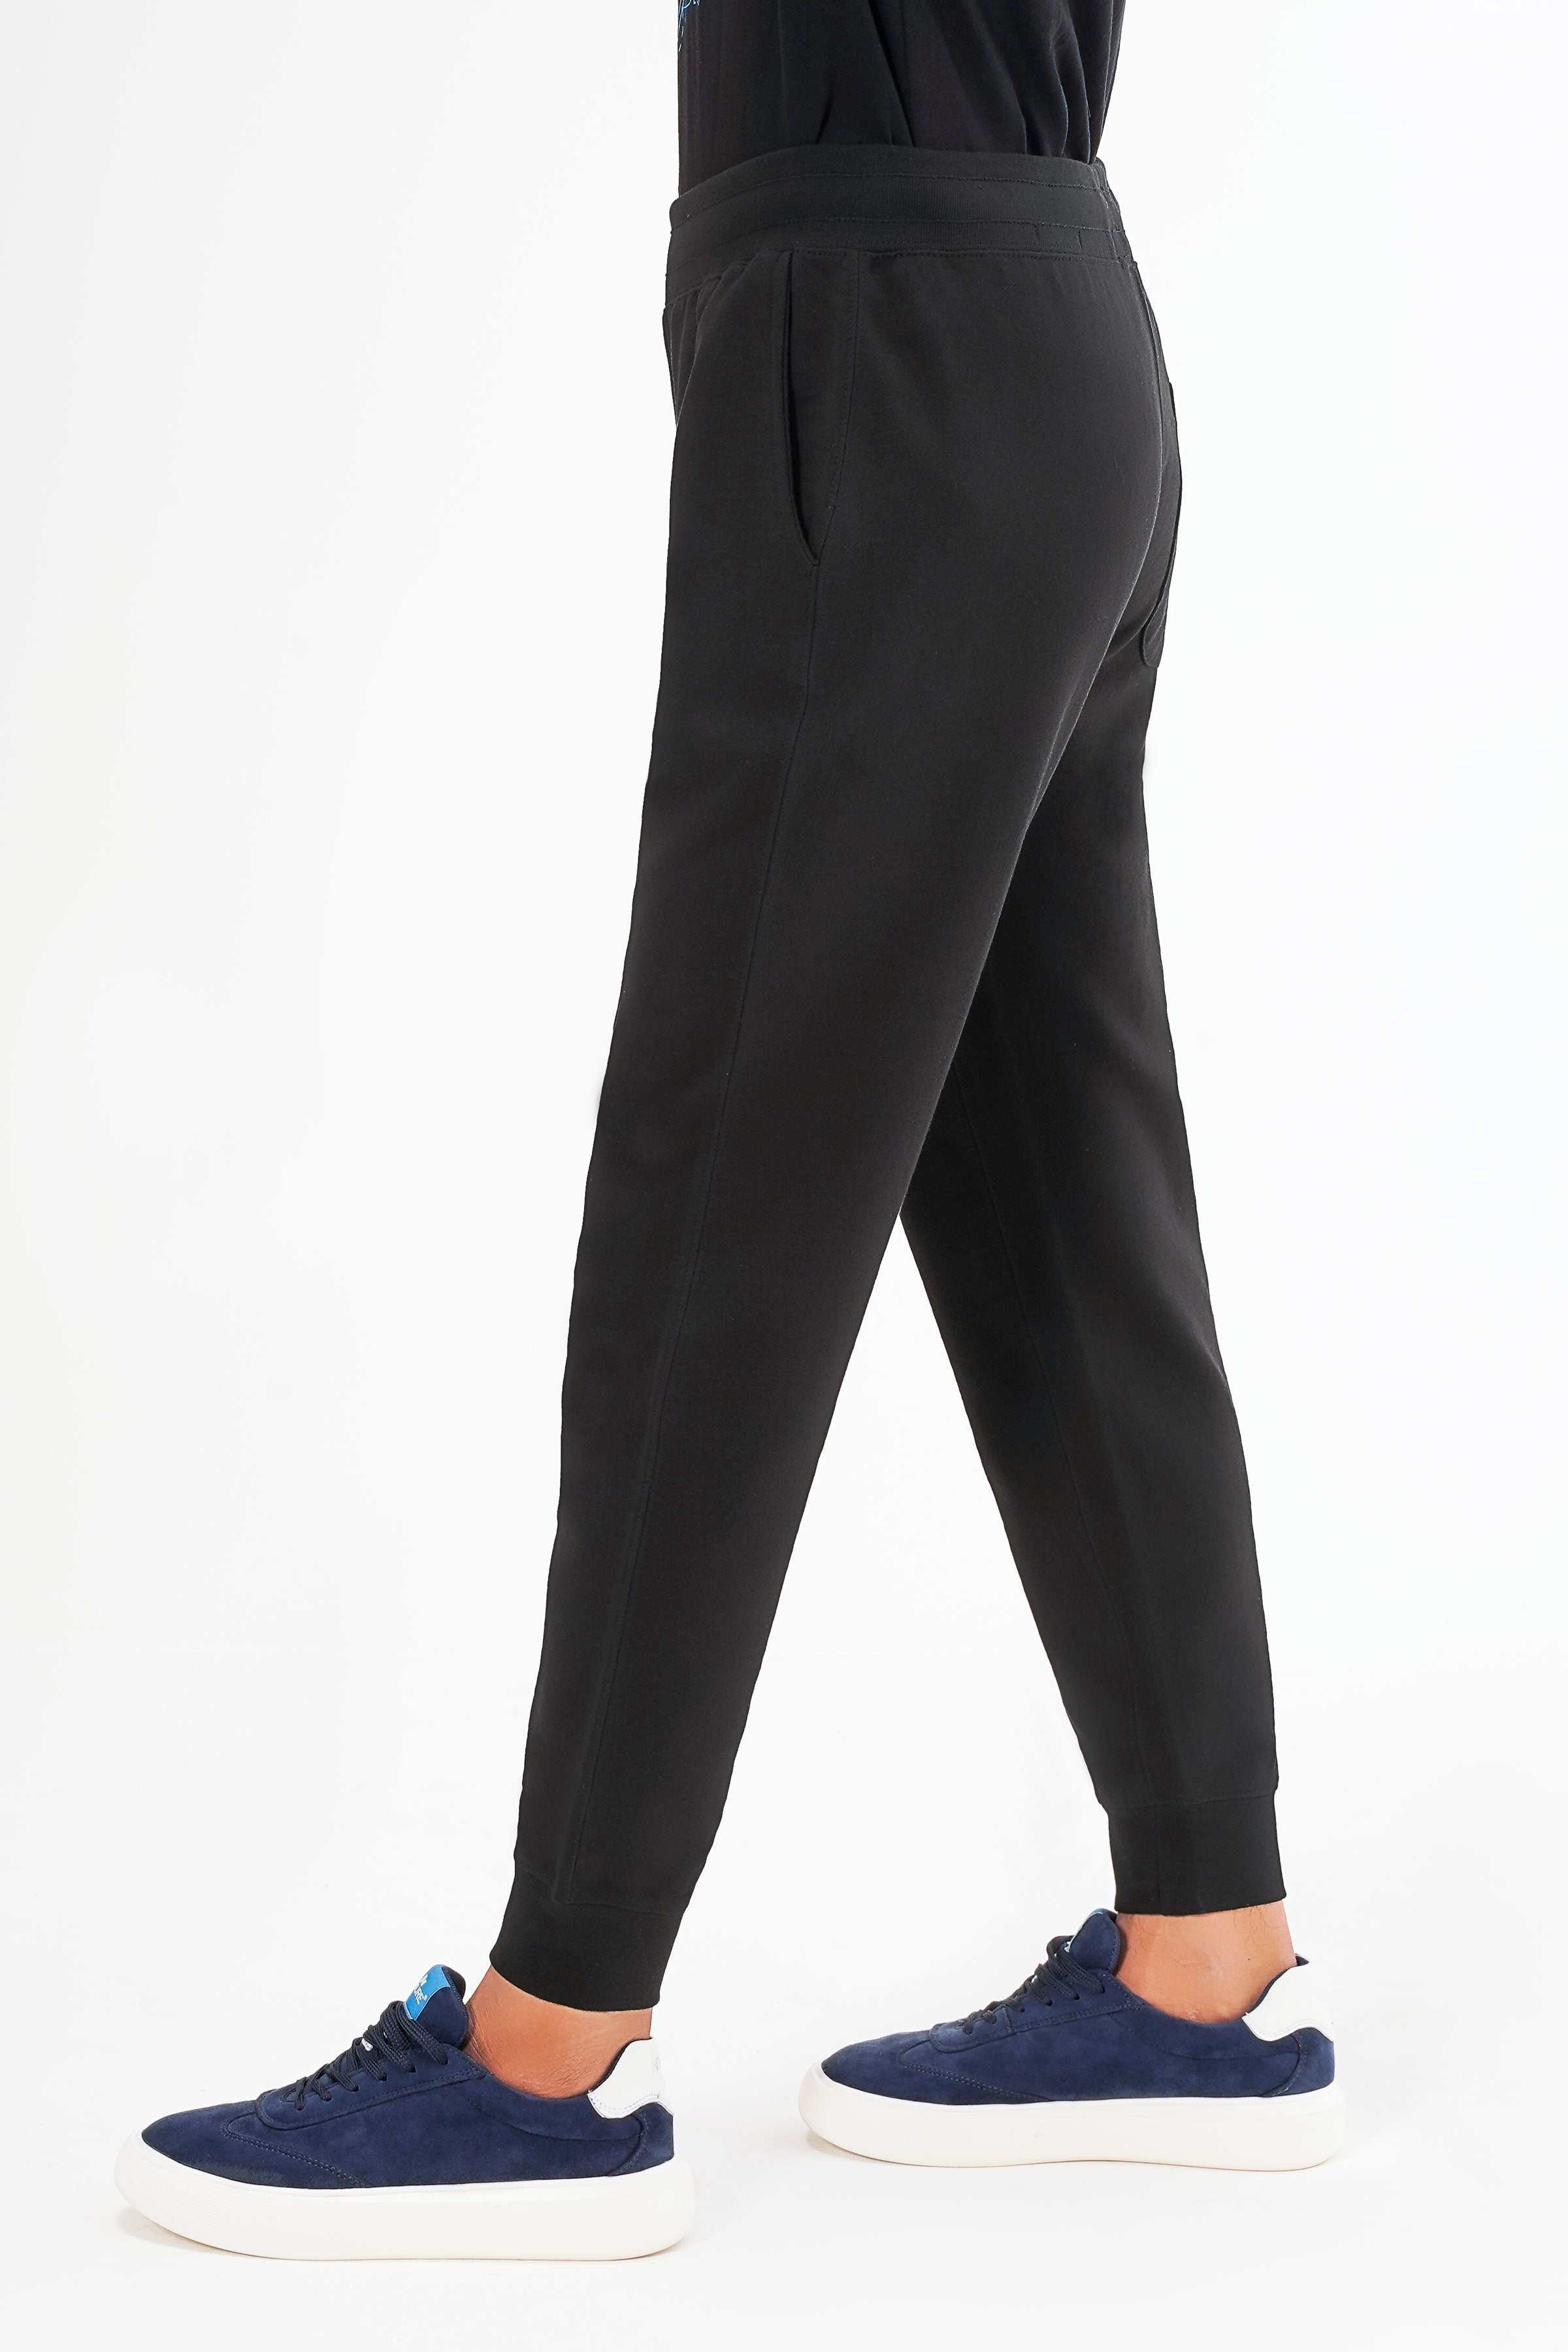 TERRY JOGGER TROUSER BLACK at Charcoal Clothing